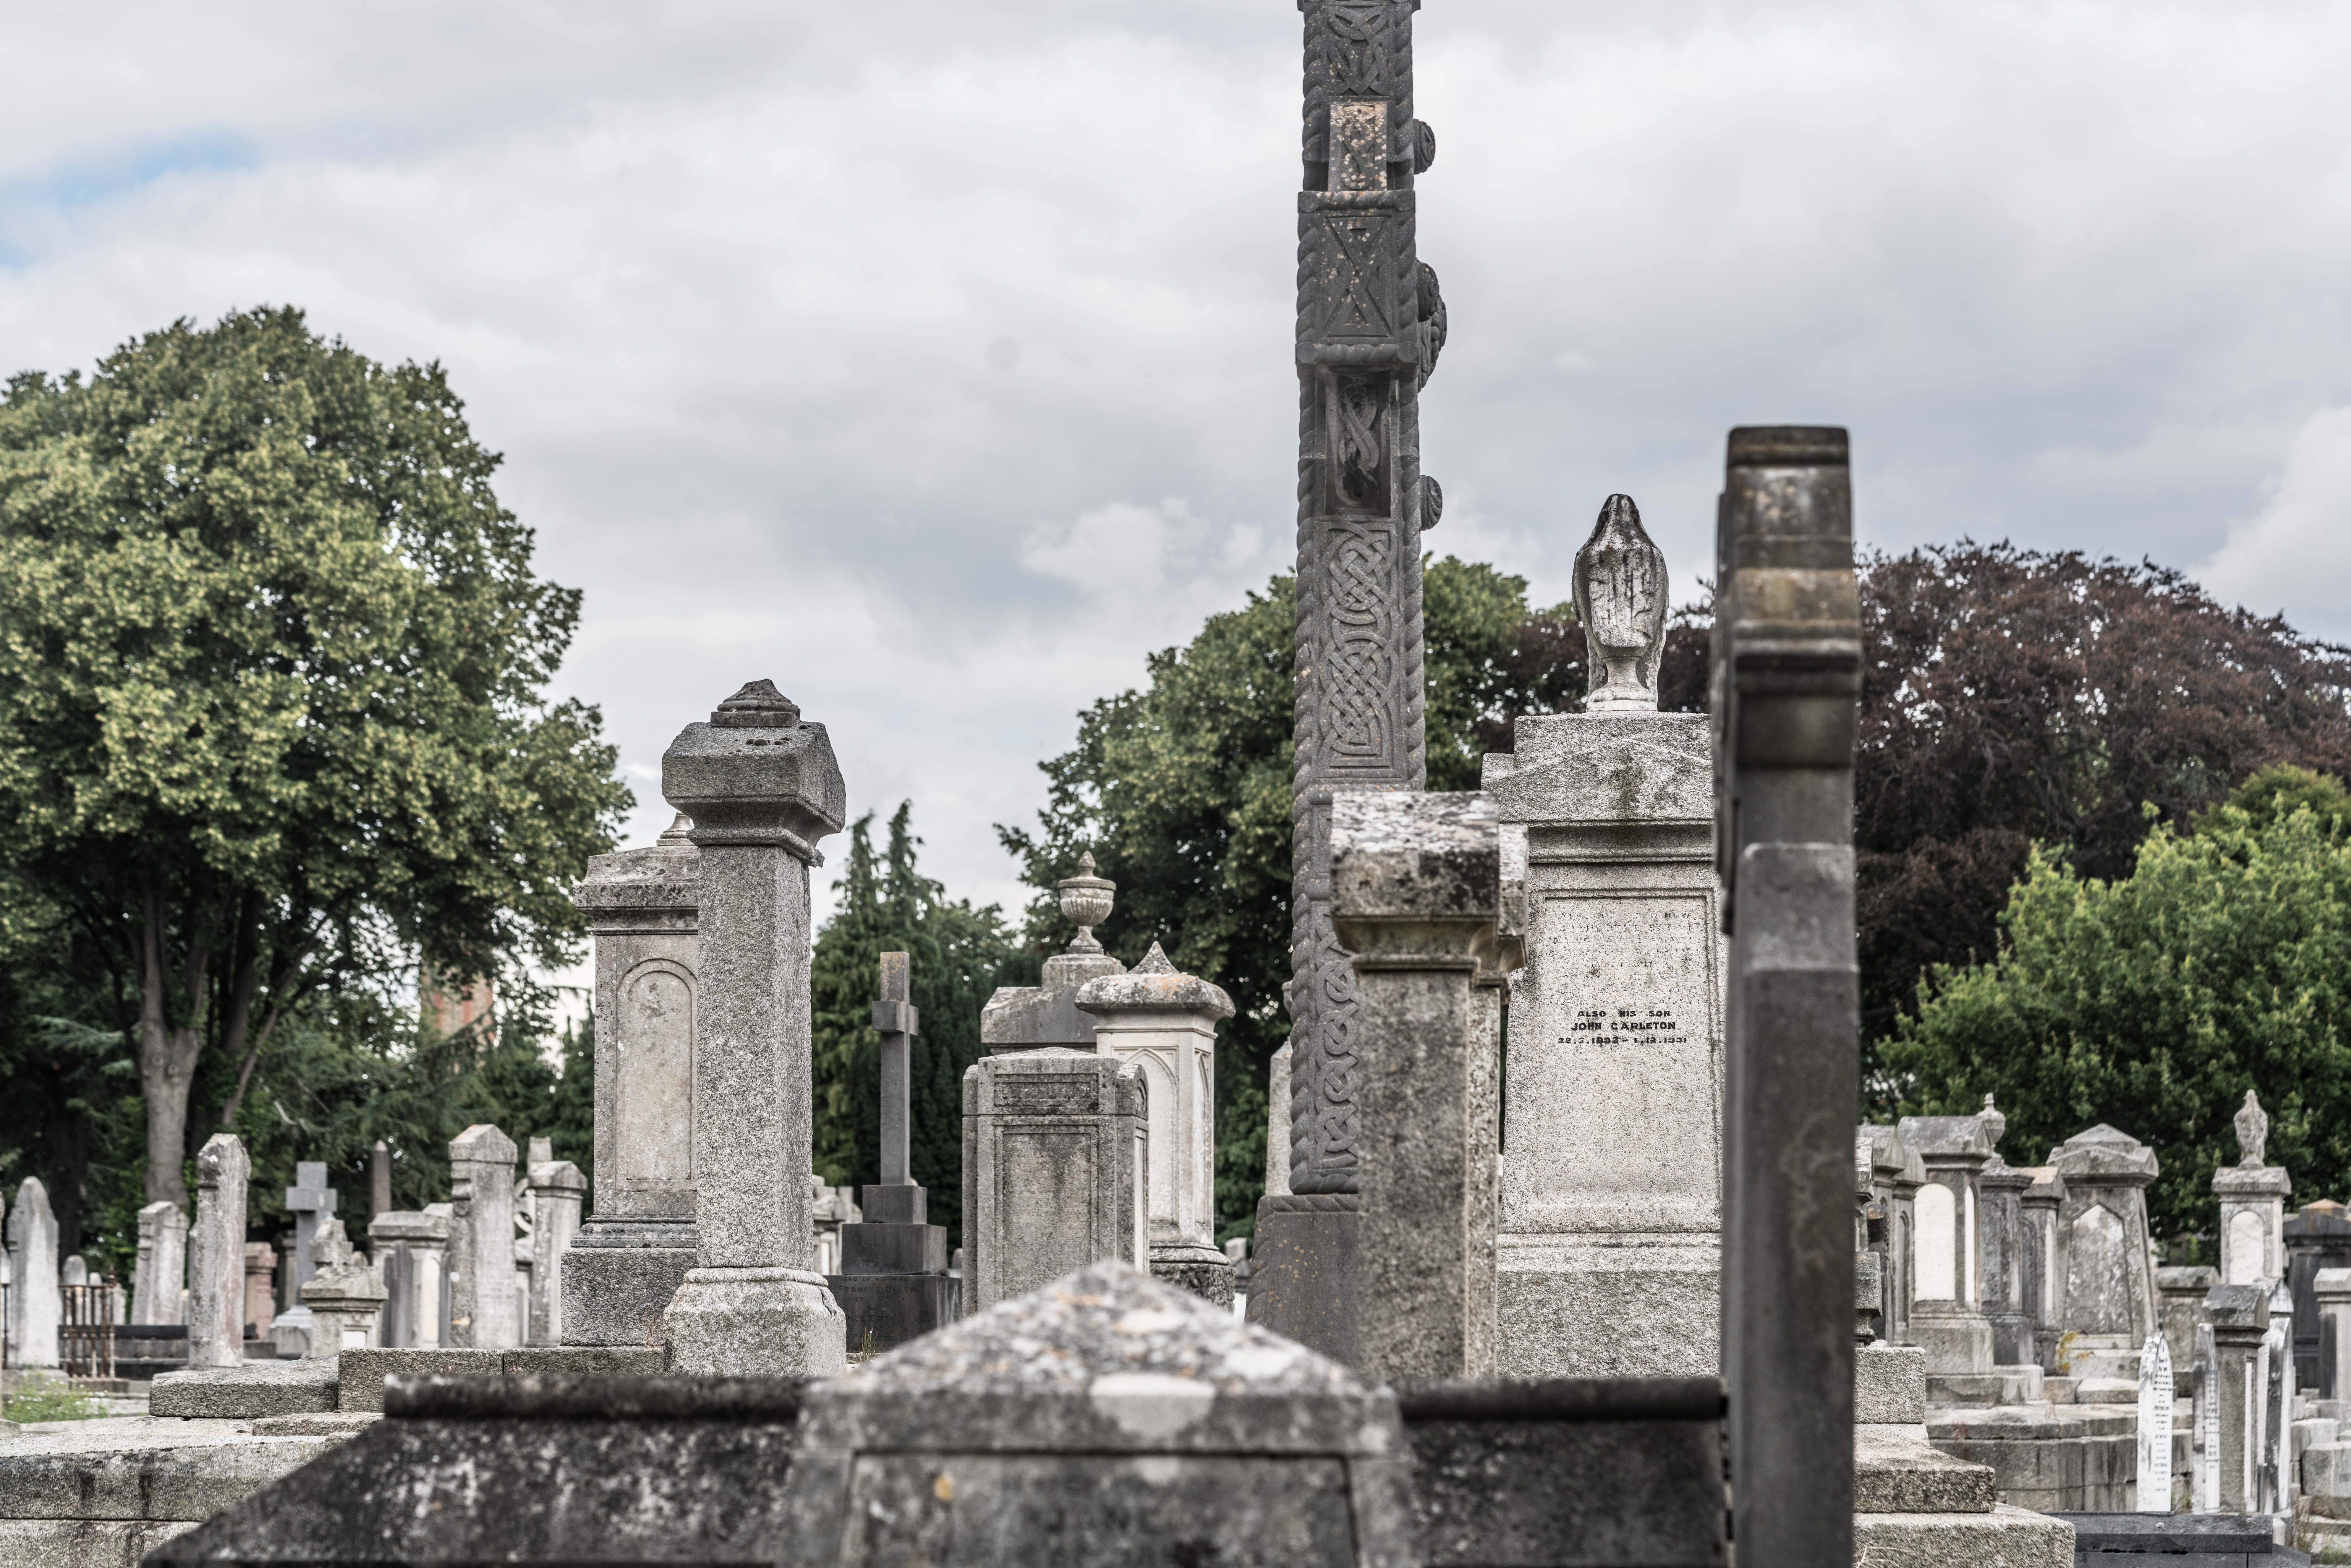  Mount Jerome Cemetery - August 2017 003 